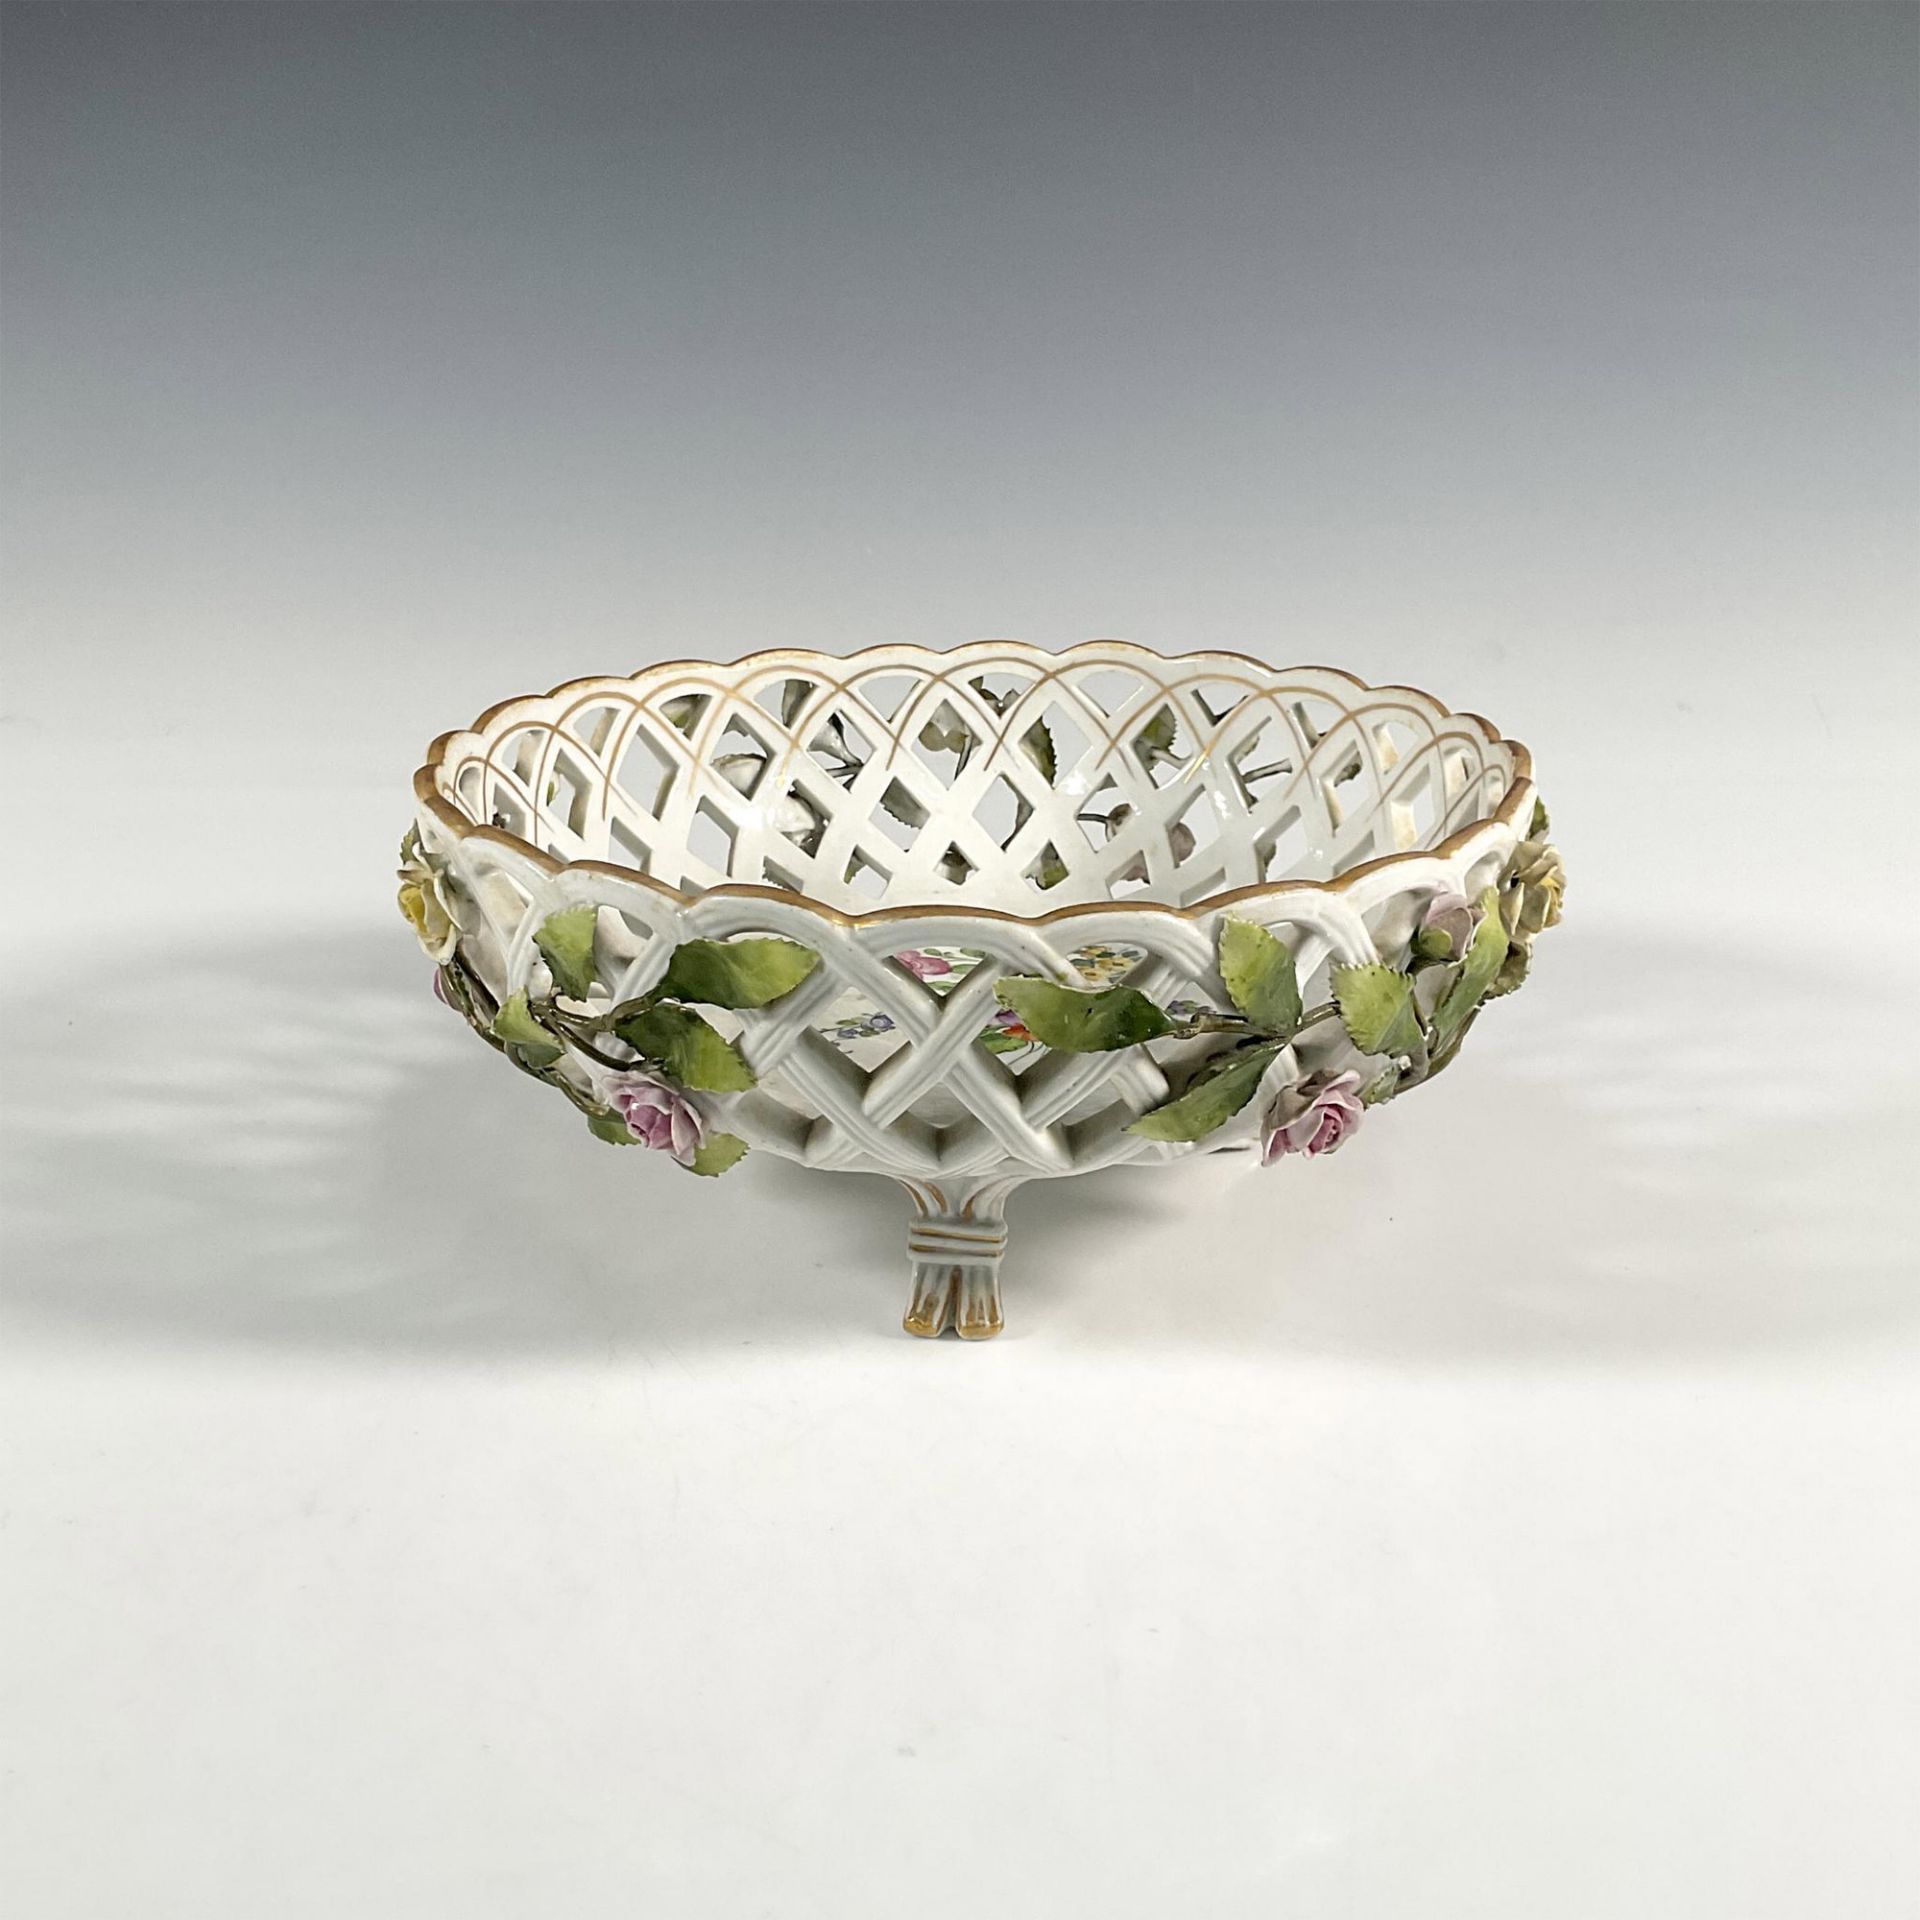 Von Schierholz Porcelain Reticulate Footed Bowl - Image 2 of 4